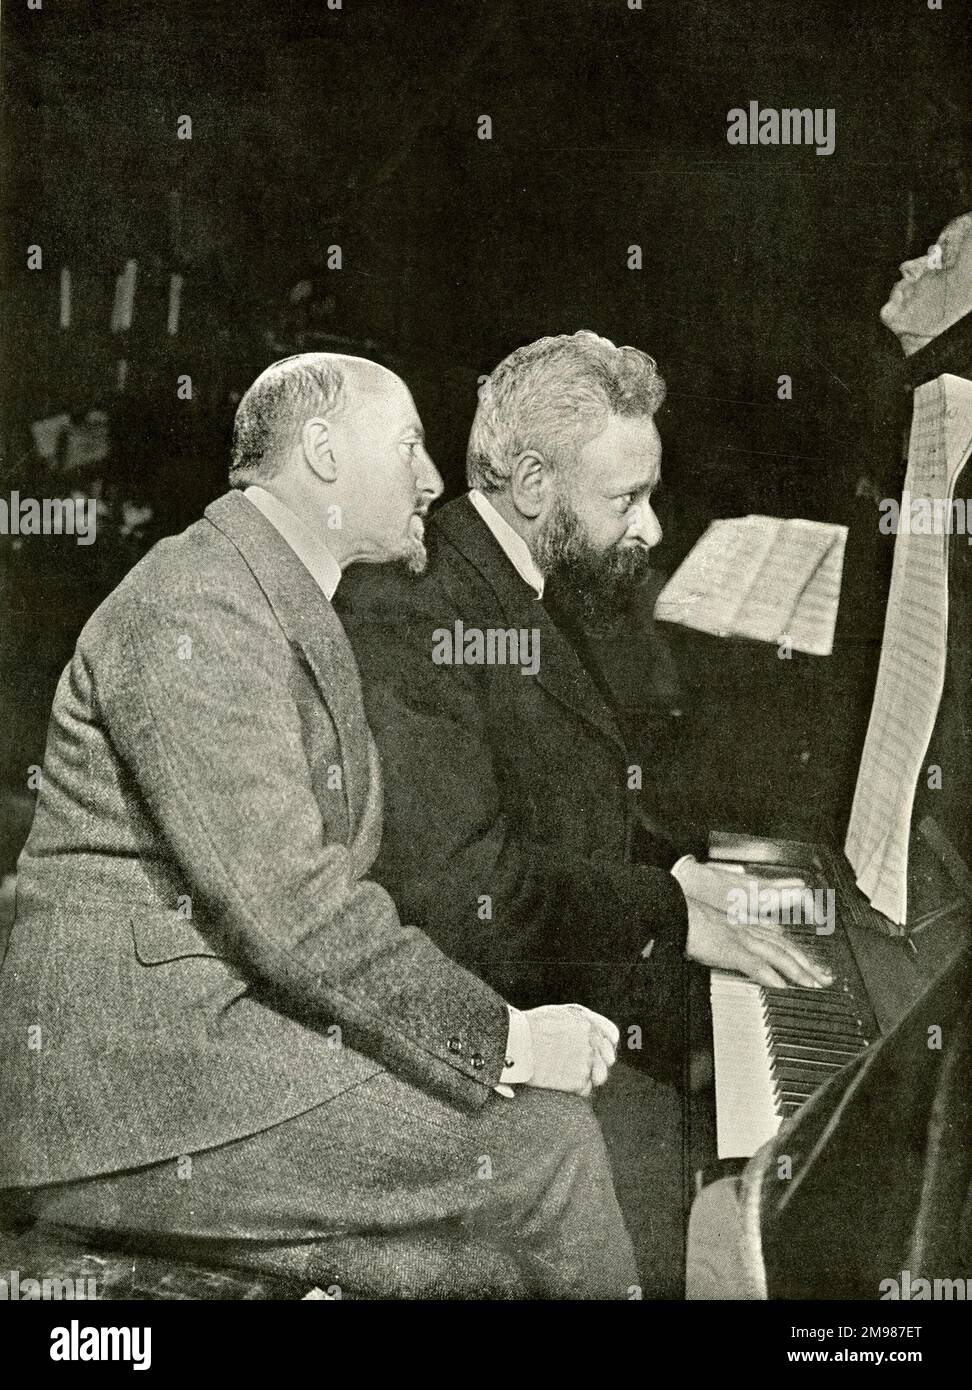 Gabriele D'Annunzio (1863-1938), Italian writer, and Alberto Franchetti (1860-1942), Italian composer, seated at a piano during rehearsals for the latter's opera, The Daughter of Iorio, libretto by d'Annunzio, premiered at La Scala Milan on 29 March 1906. Stock Photo